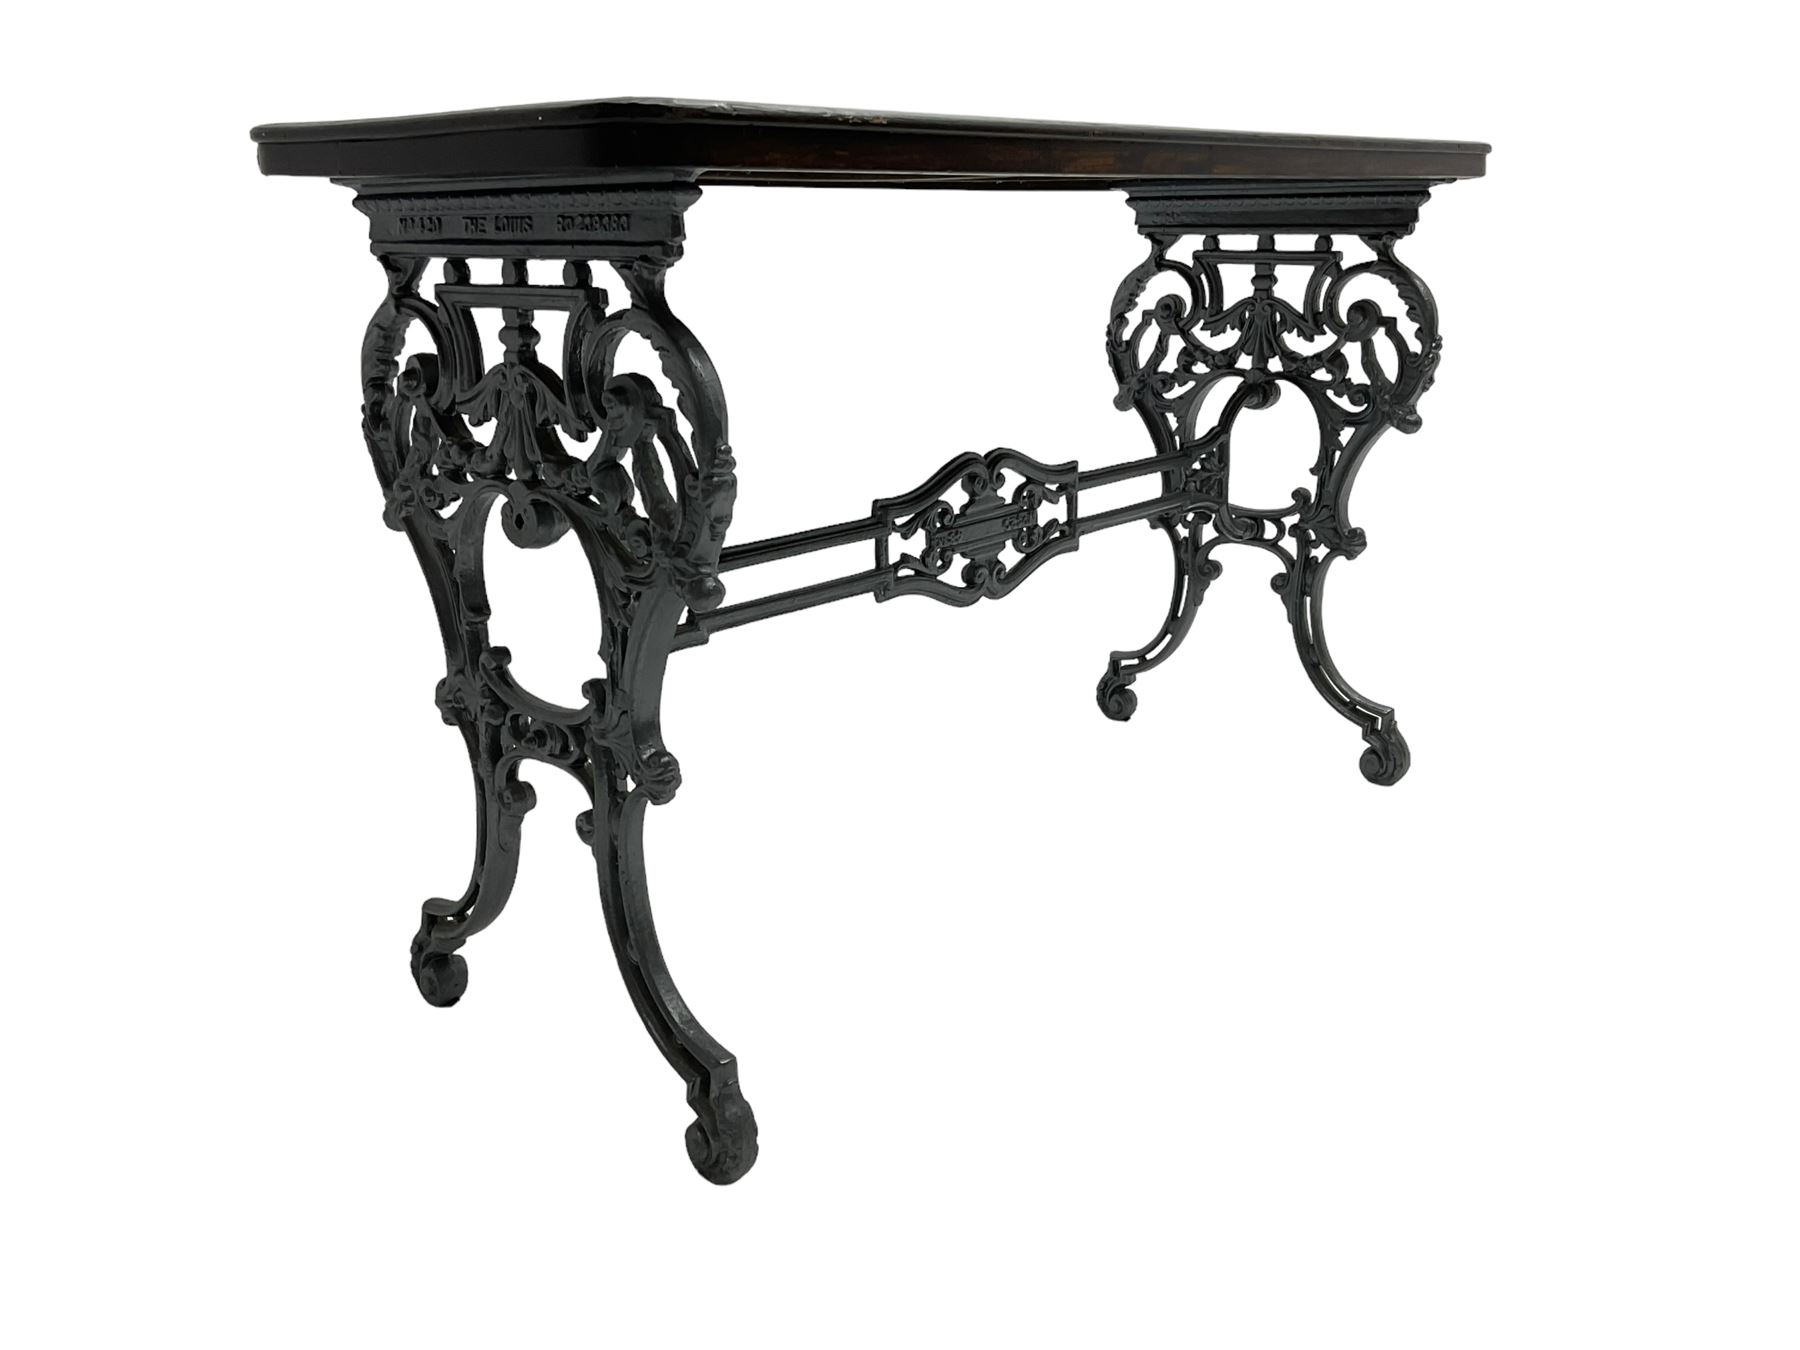 The Louis - late 19th century French design cast iron table - Image 6 of 9